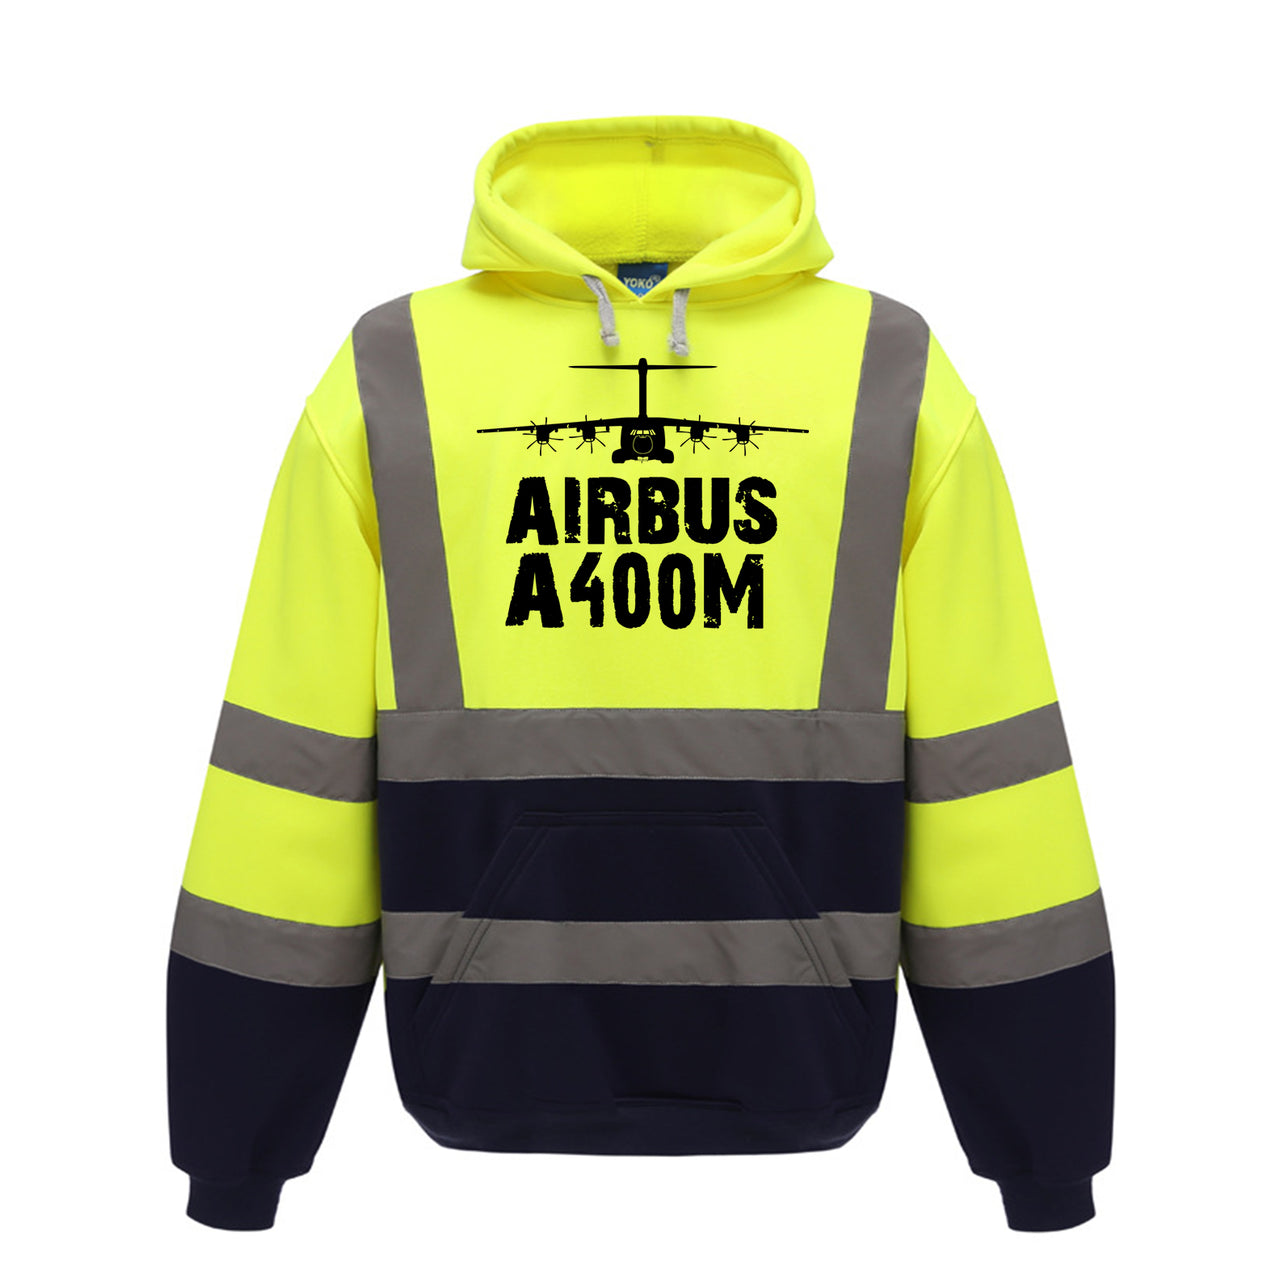 Airbus A400M & Plane Designed Reflective Hoodies